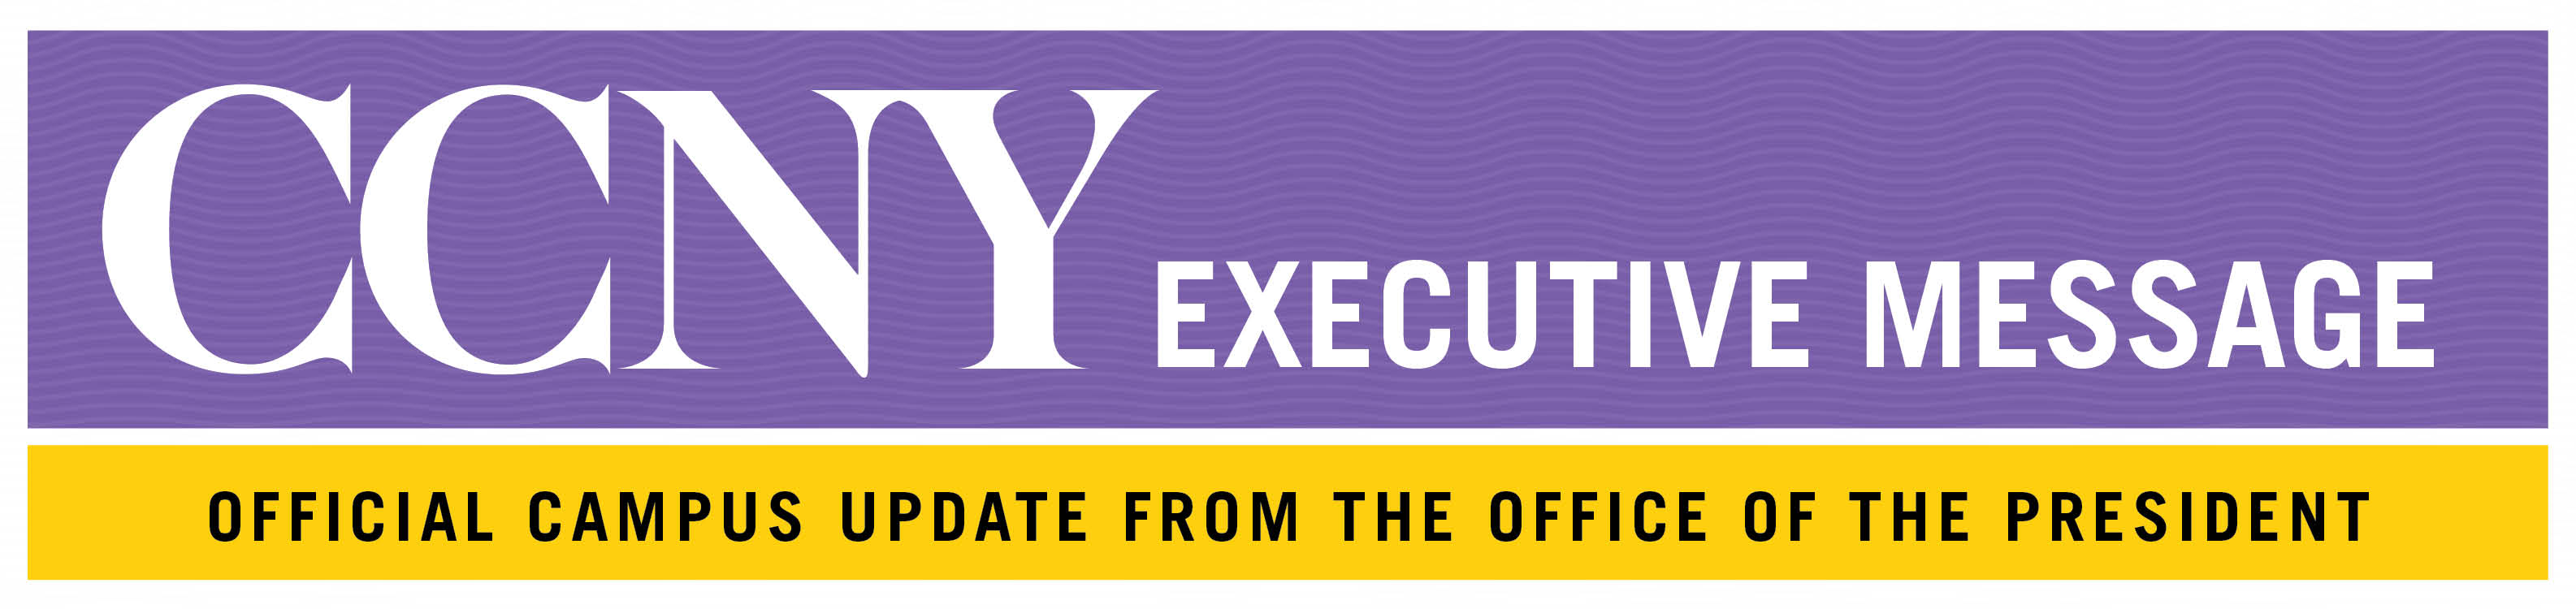 CCNY Executive Message: Official Campus Update from the Office of the President